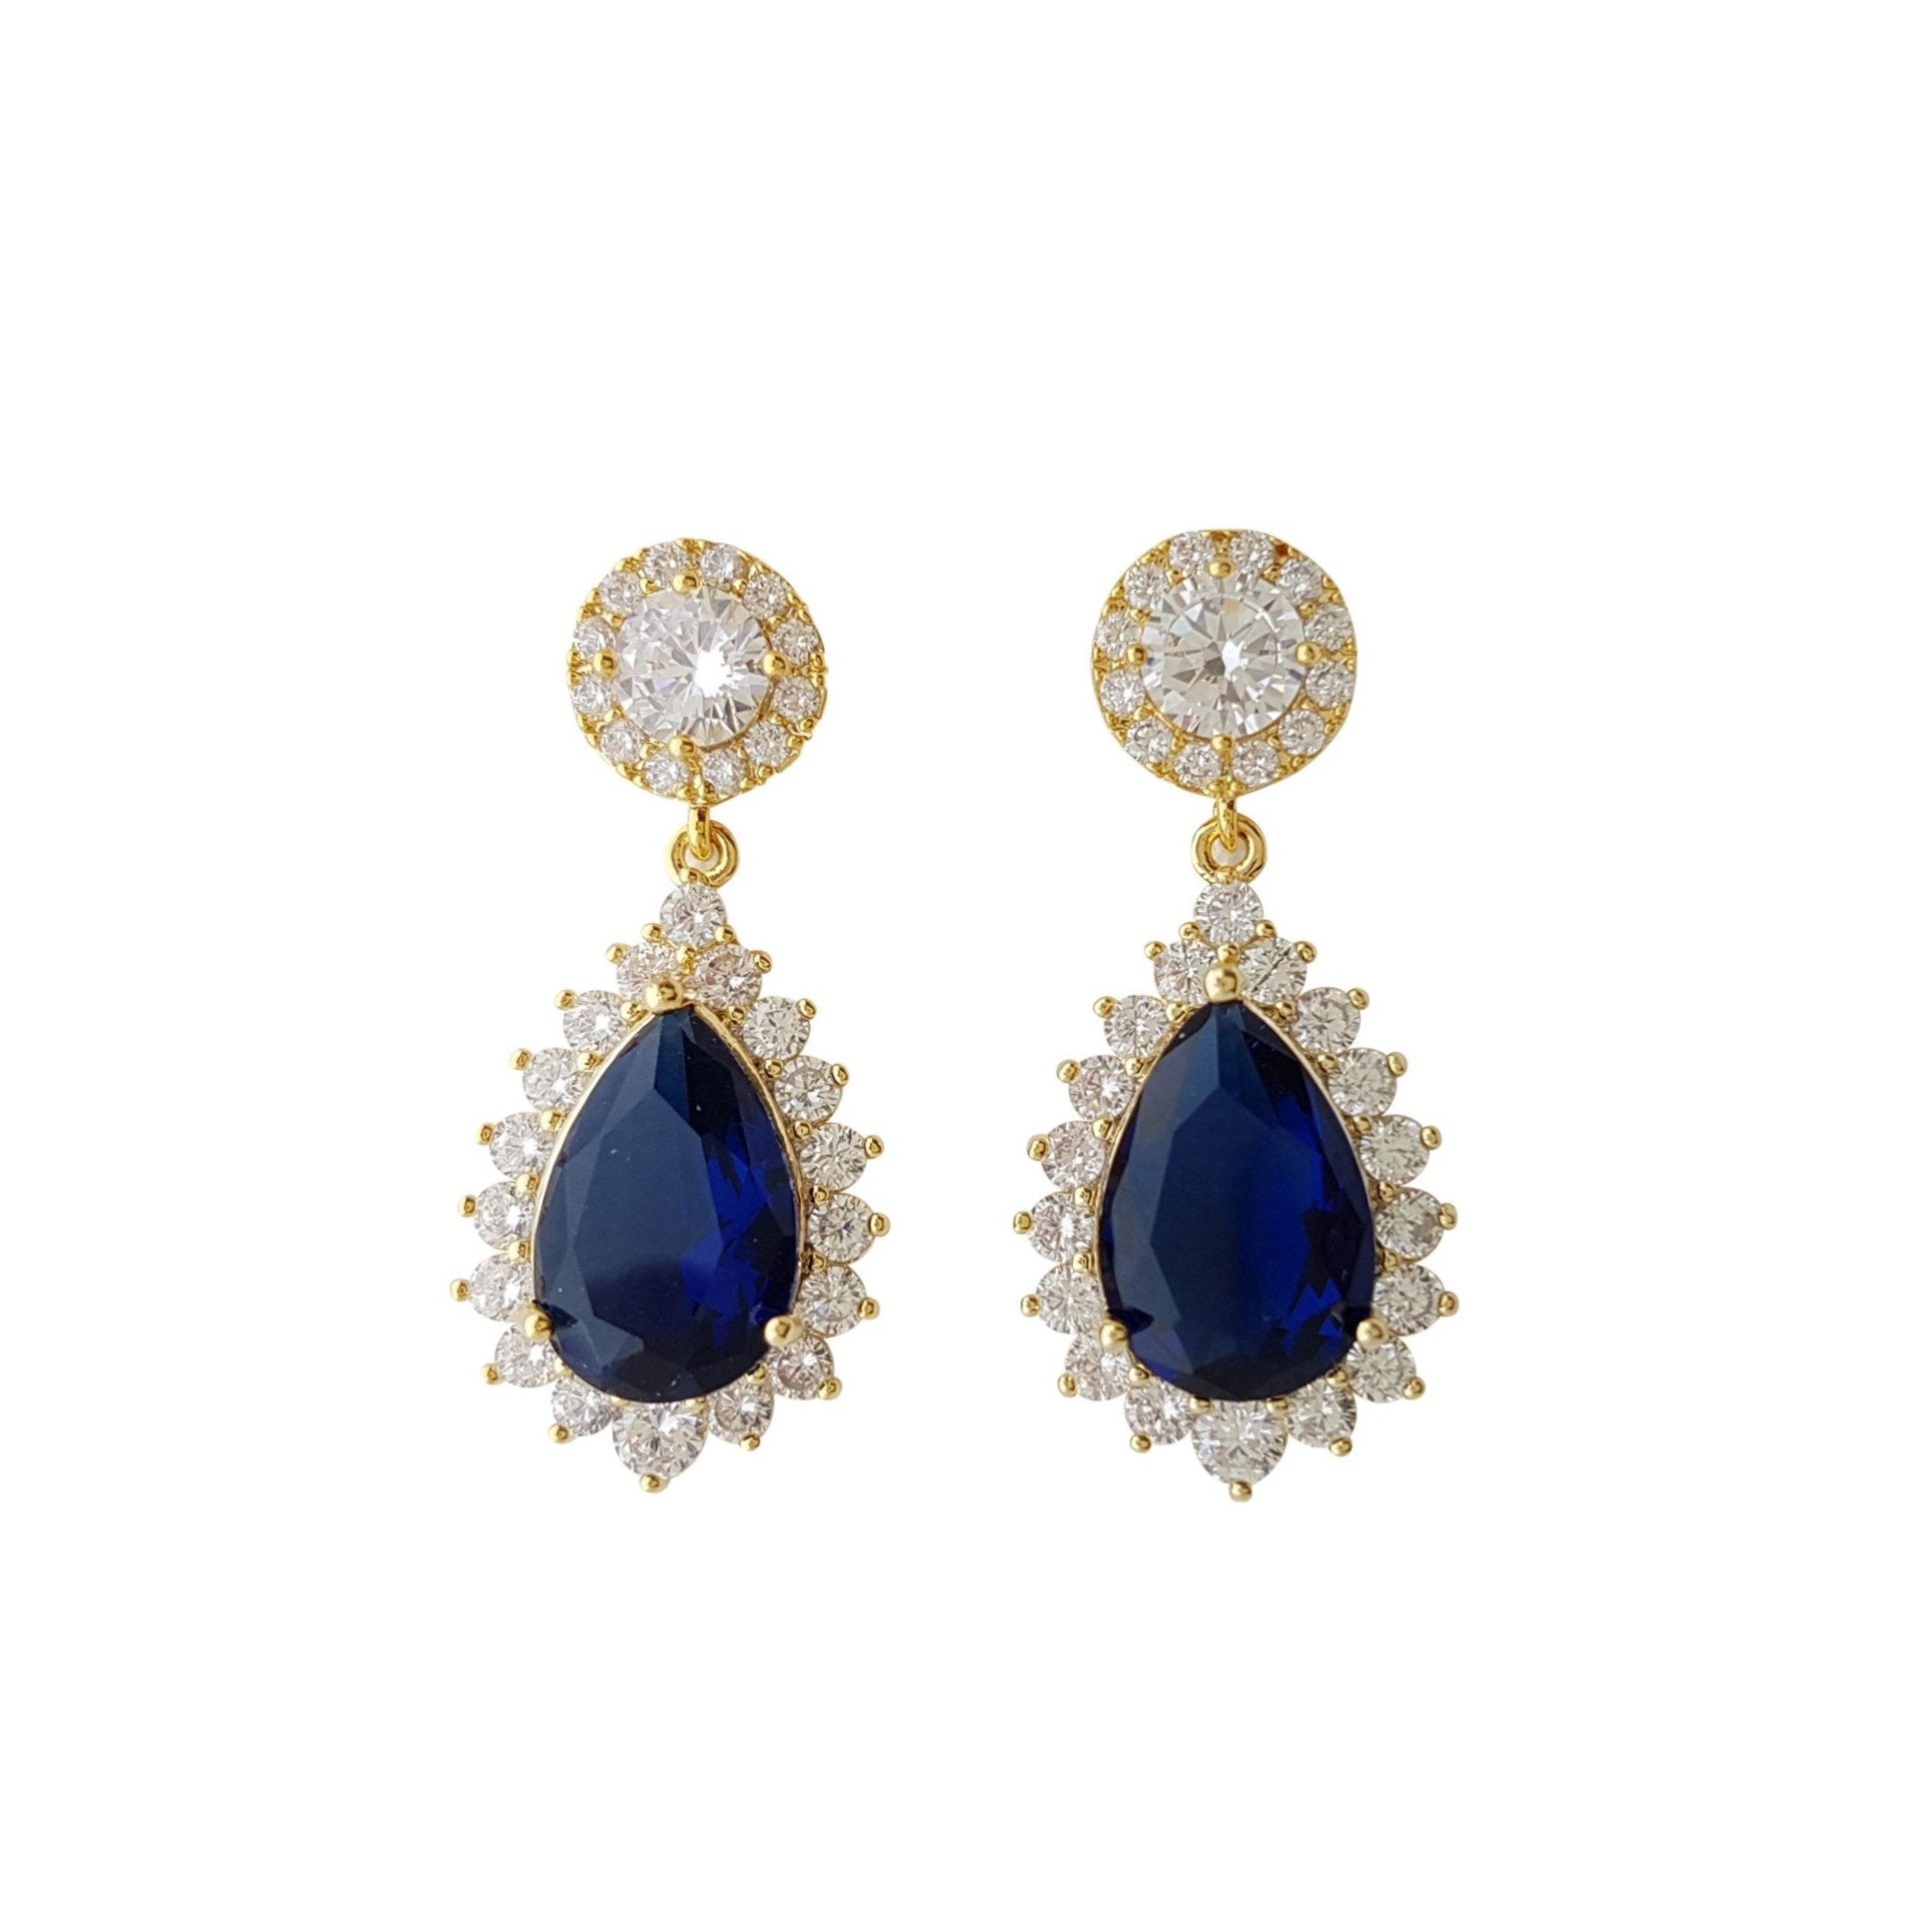 Midnight Stone Earrings, Sweet Party Jewerly from Spool 72. | Spool No.72